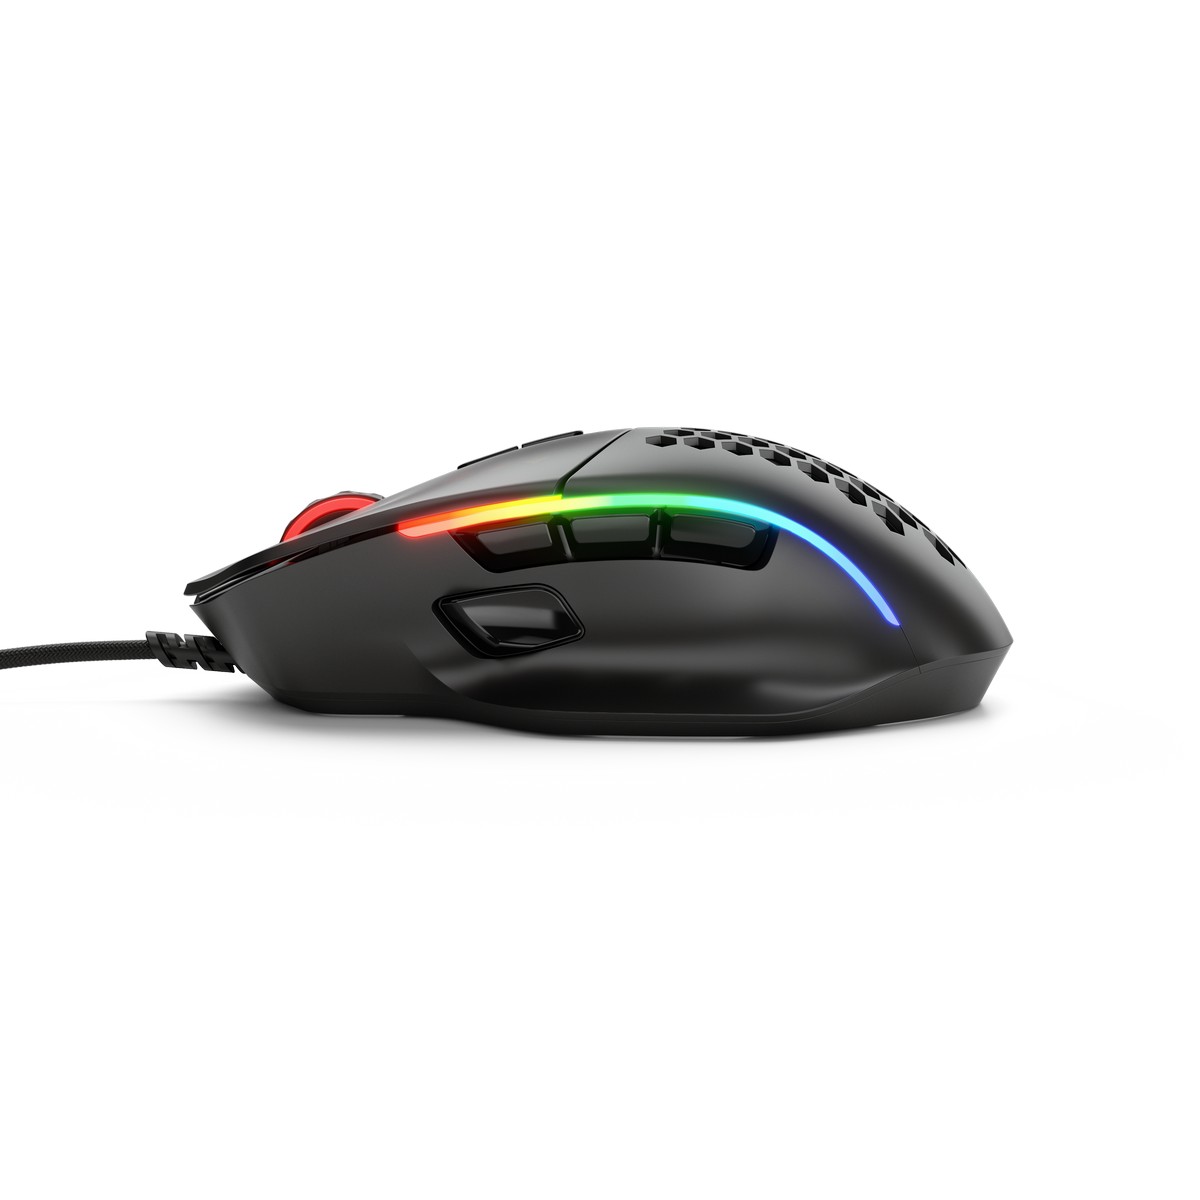 Glorious - Glorious Model I USB RGB Lightweight Gaming Mouse - Matte Black (GLO-MS-I-MB)